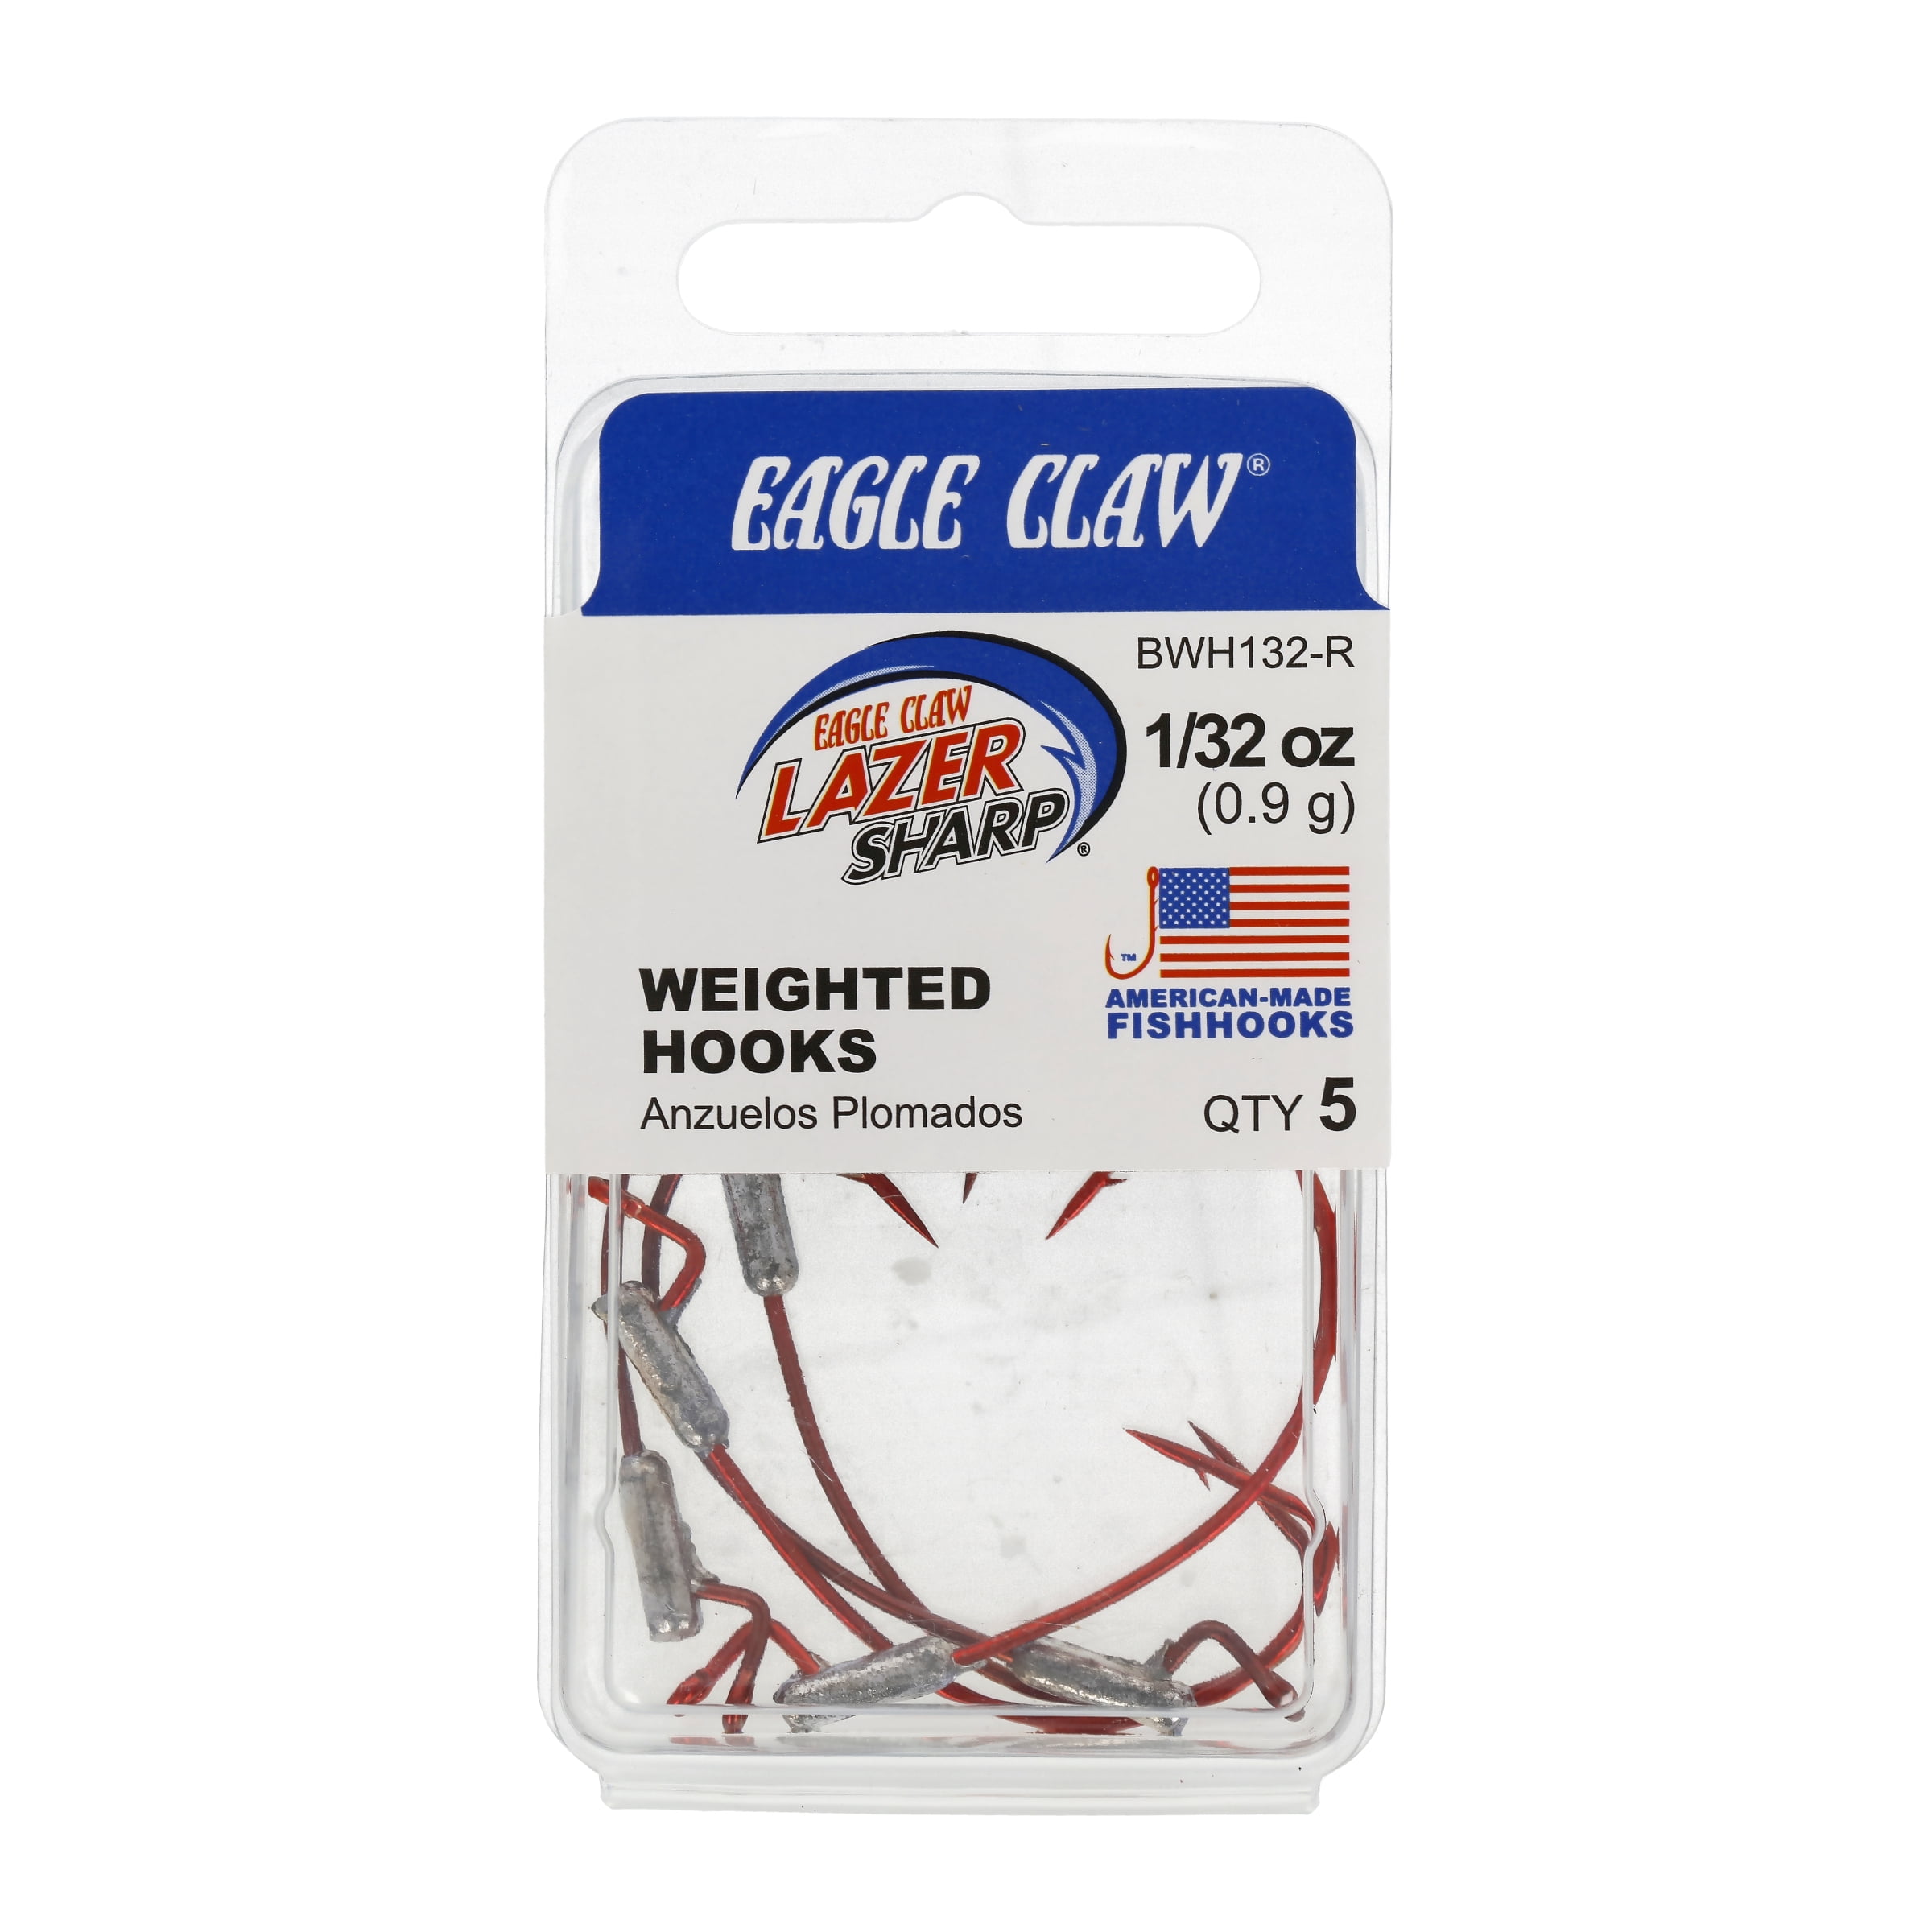 Lazer Sharp Weighted Fishing Hook, Red Hook, 1/32 oz., BWH132-R 